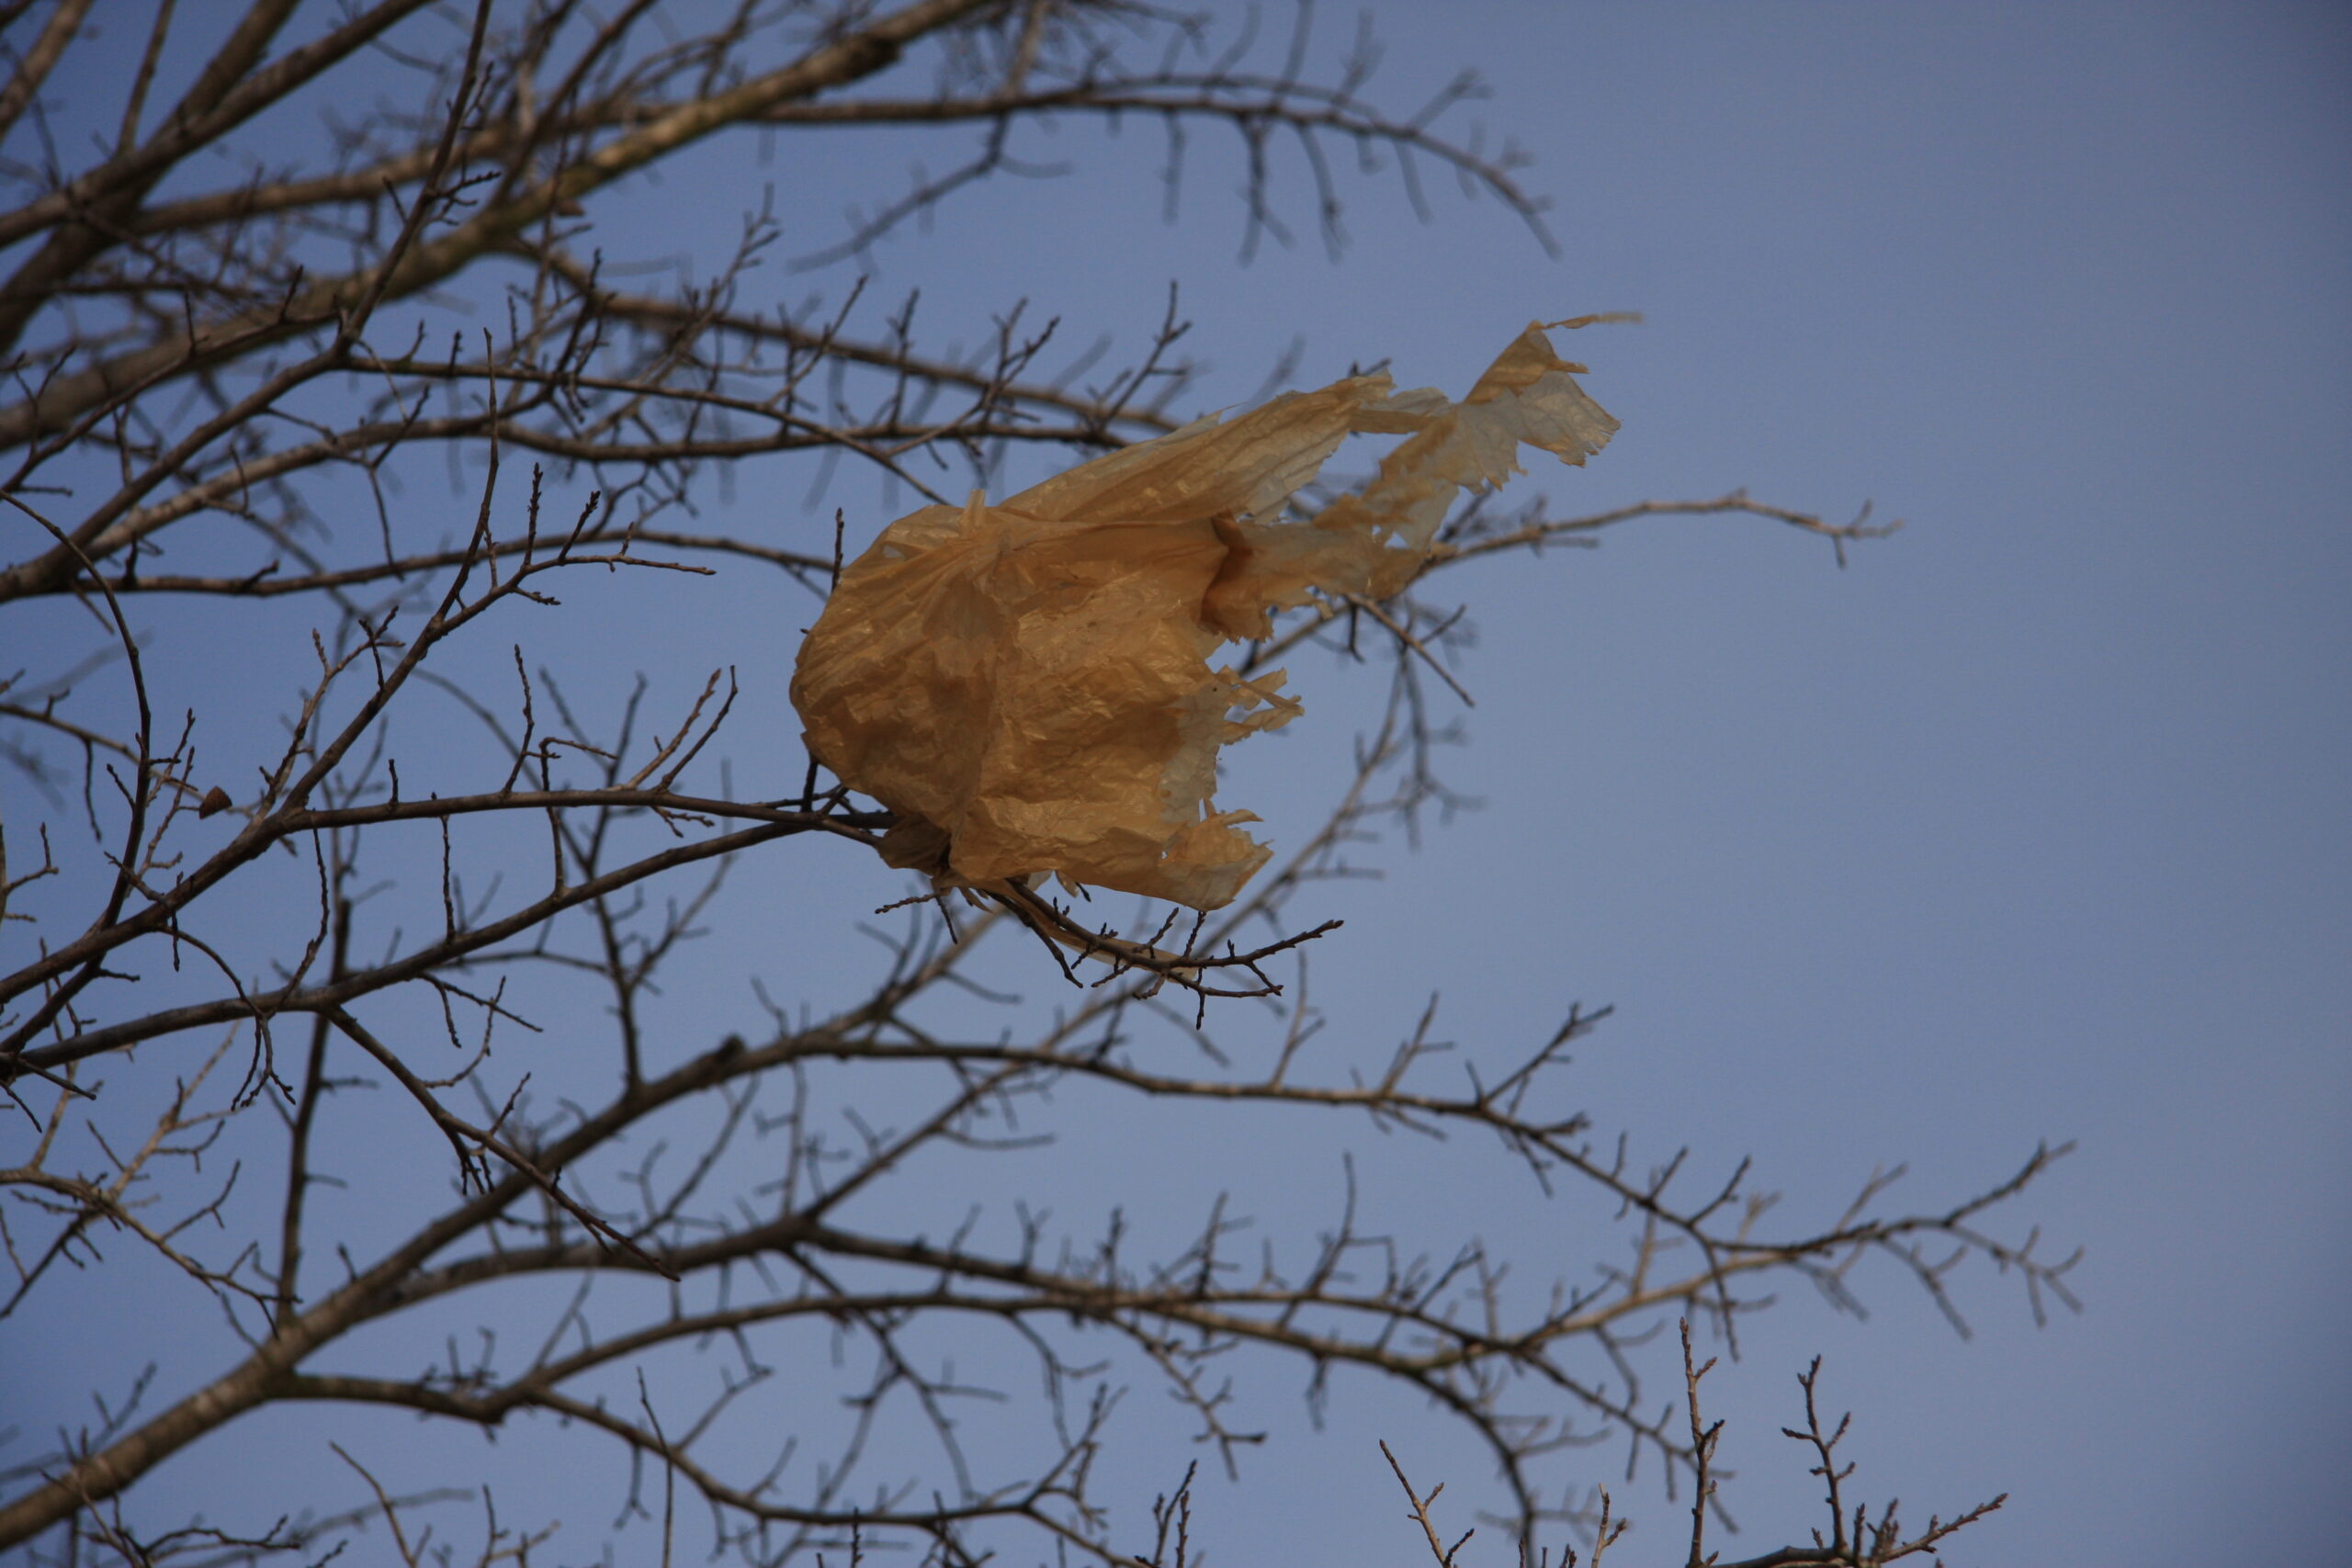 image of a plastic bag caught in a tree.